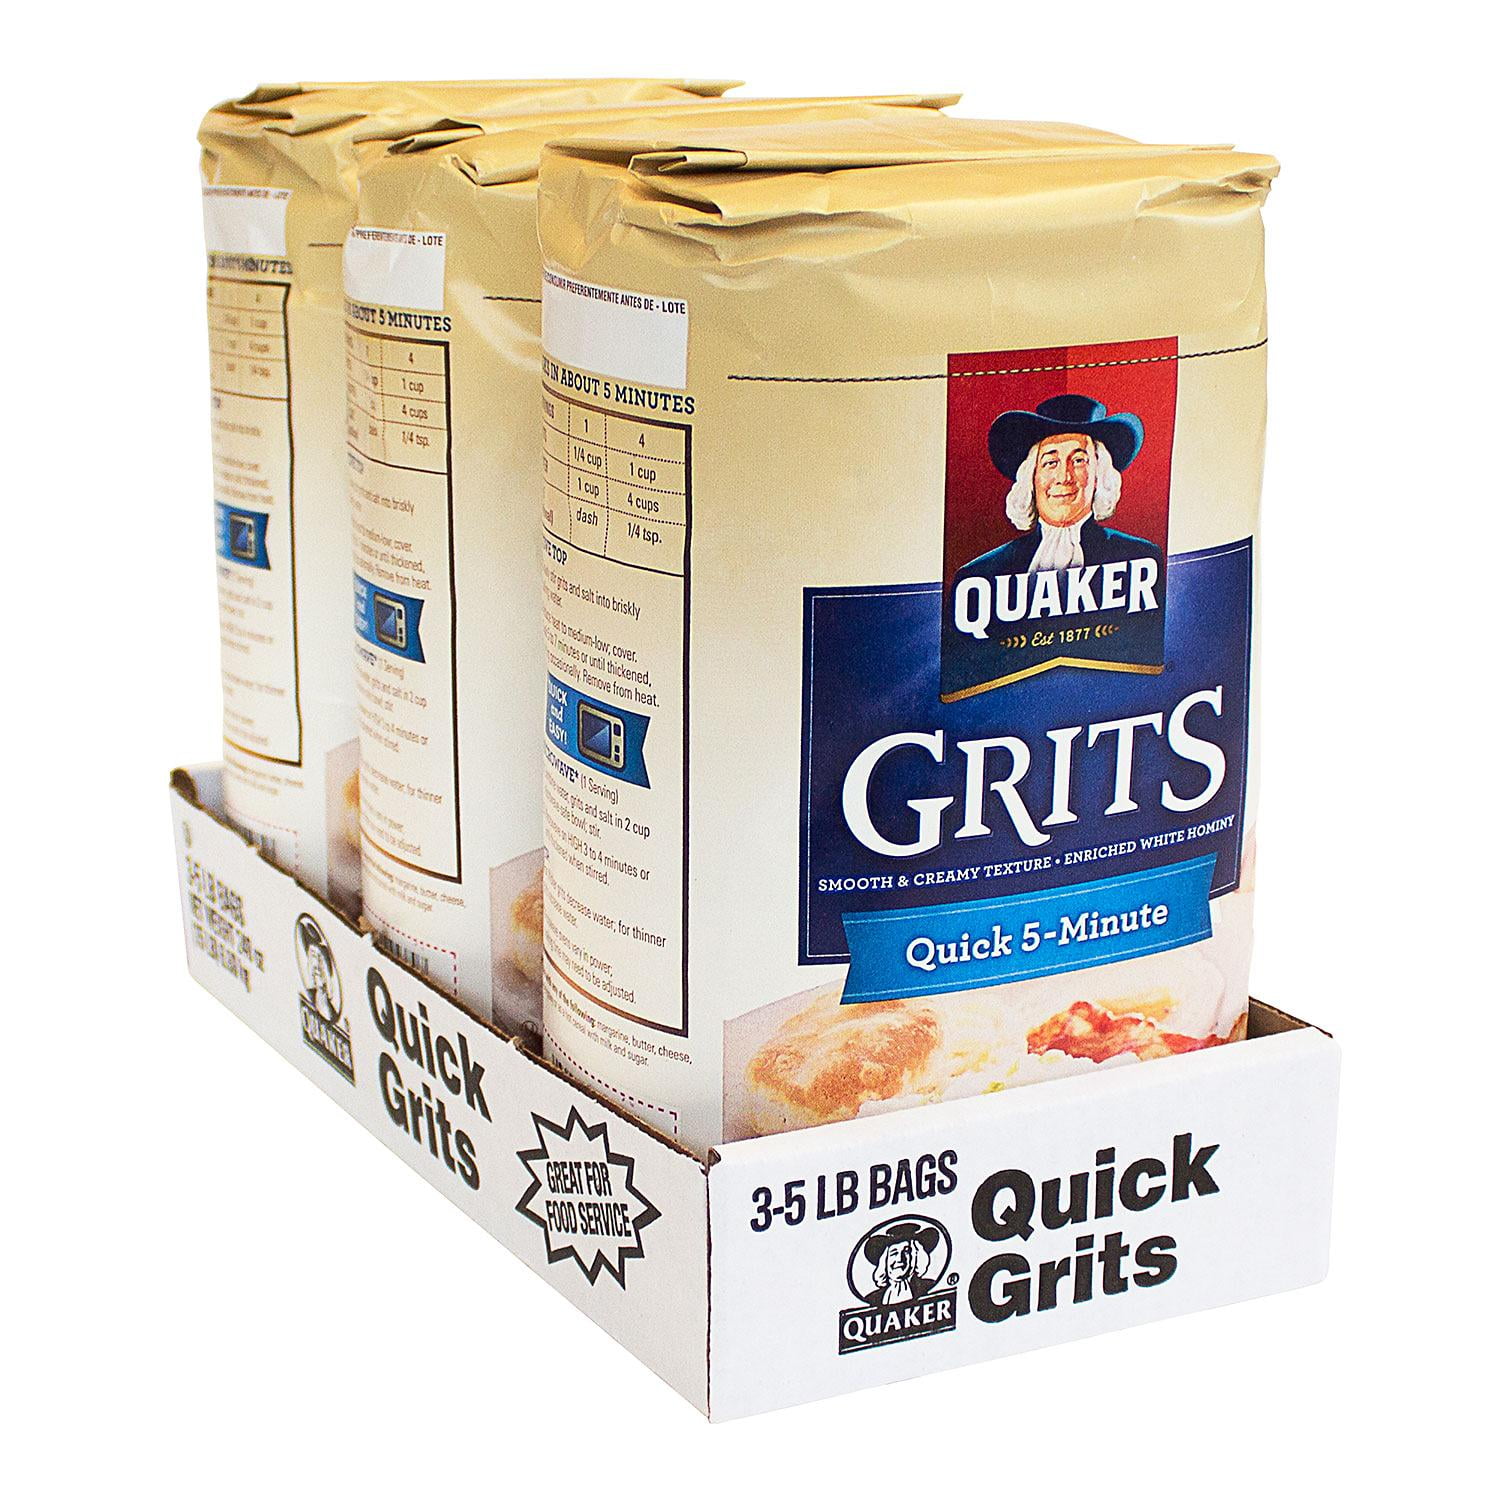 Save on Quaker Grits Quick 5-minute Order Online Delivery